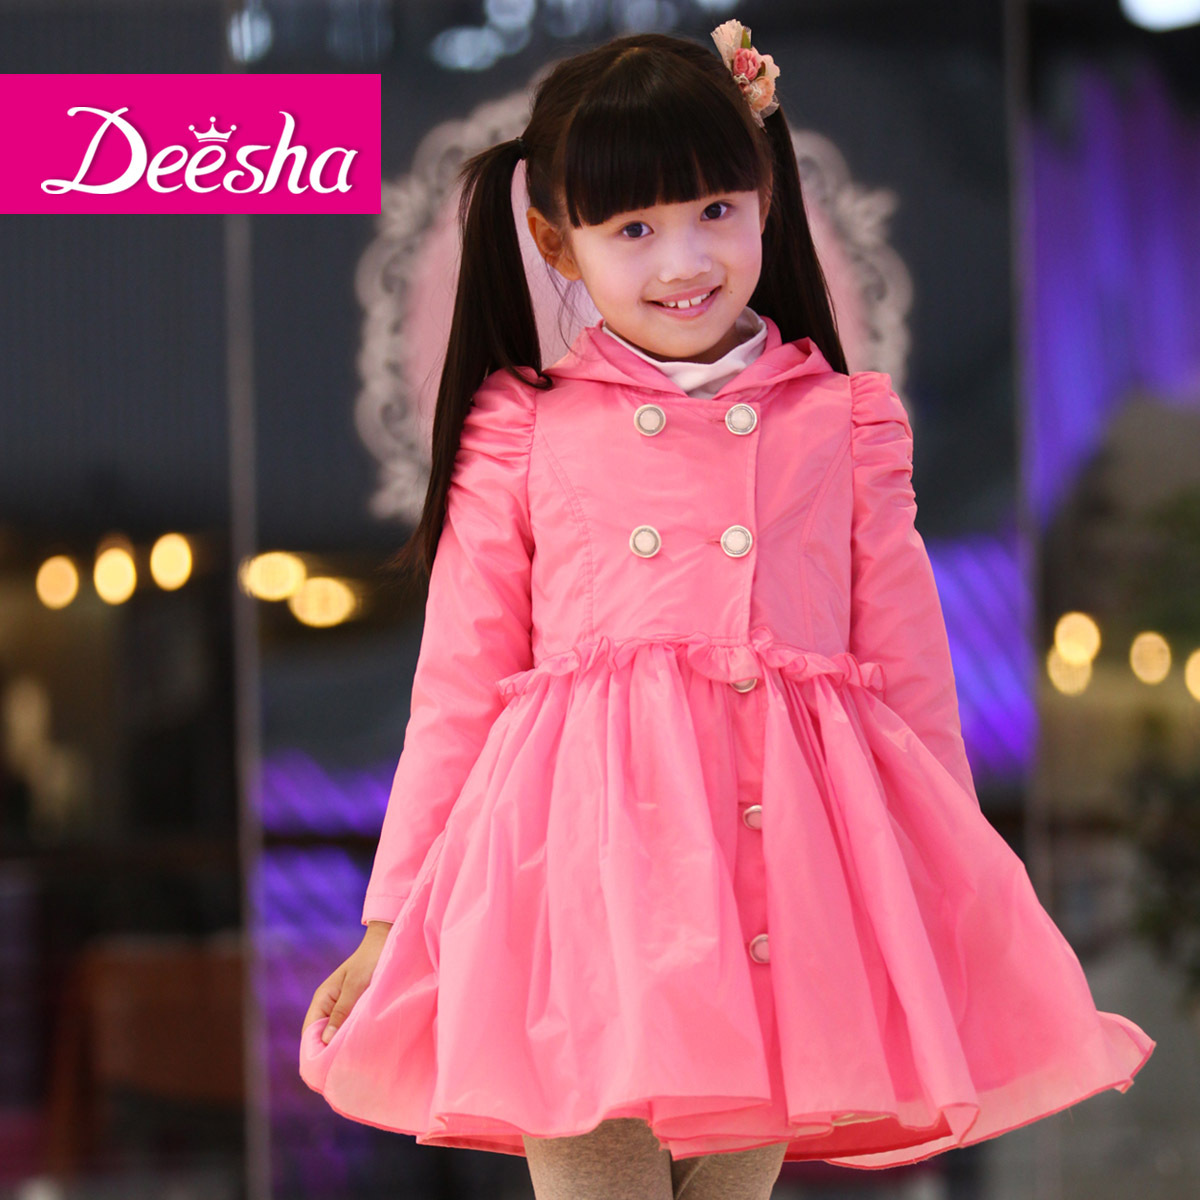 DEESHA 2012 autumn new arrival female clothing gentlewomen princess child long-sleeve trench 1217014